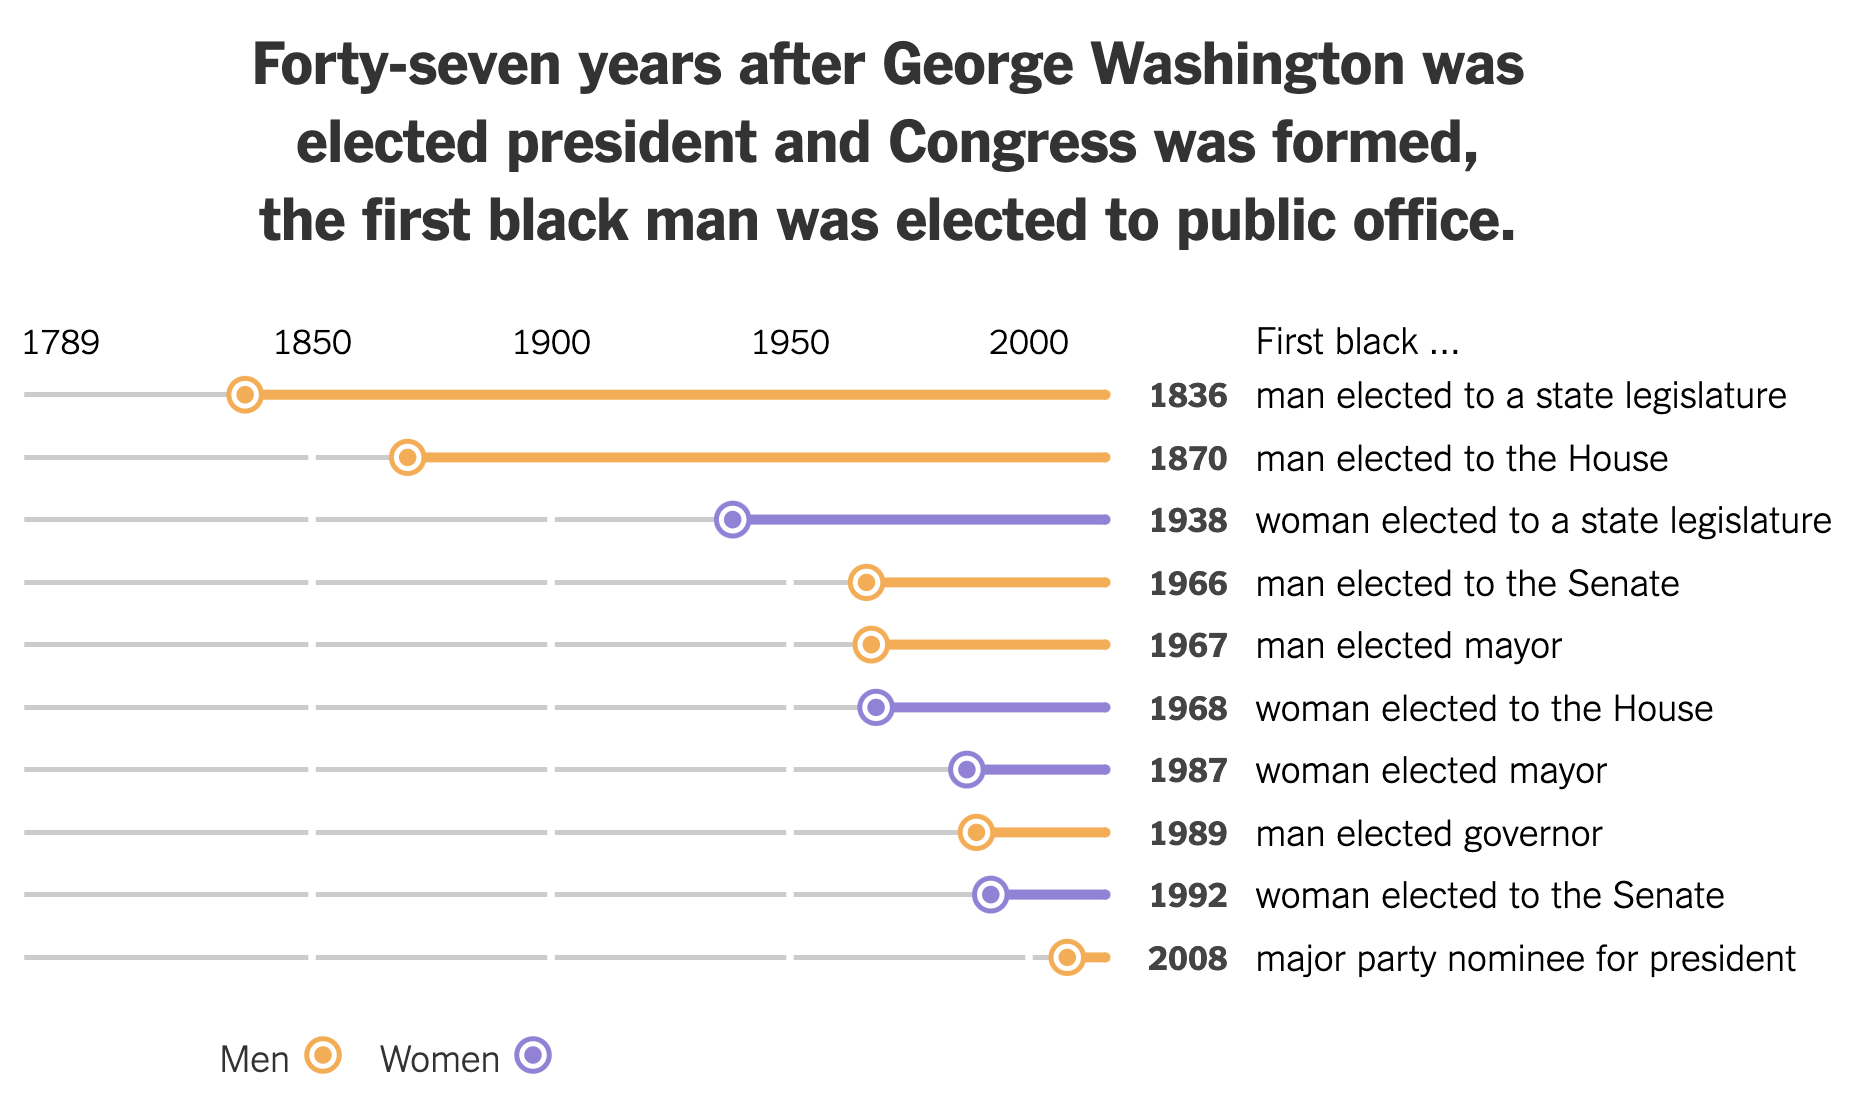 A visualisation of when first black people were elected in different positions in the US. The chart has a wide layout, with labels next to the lines